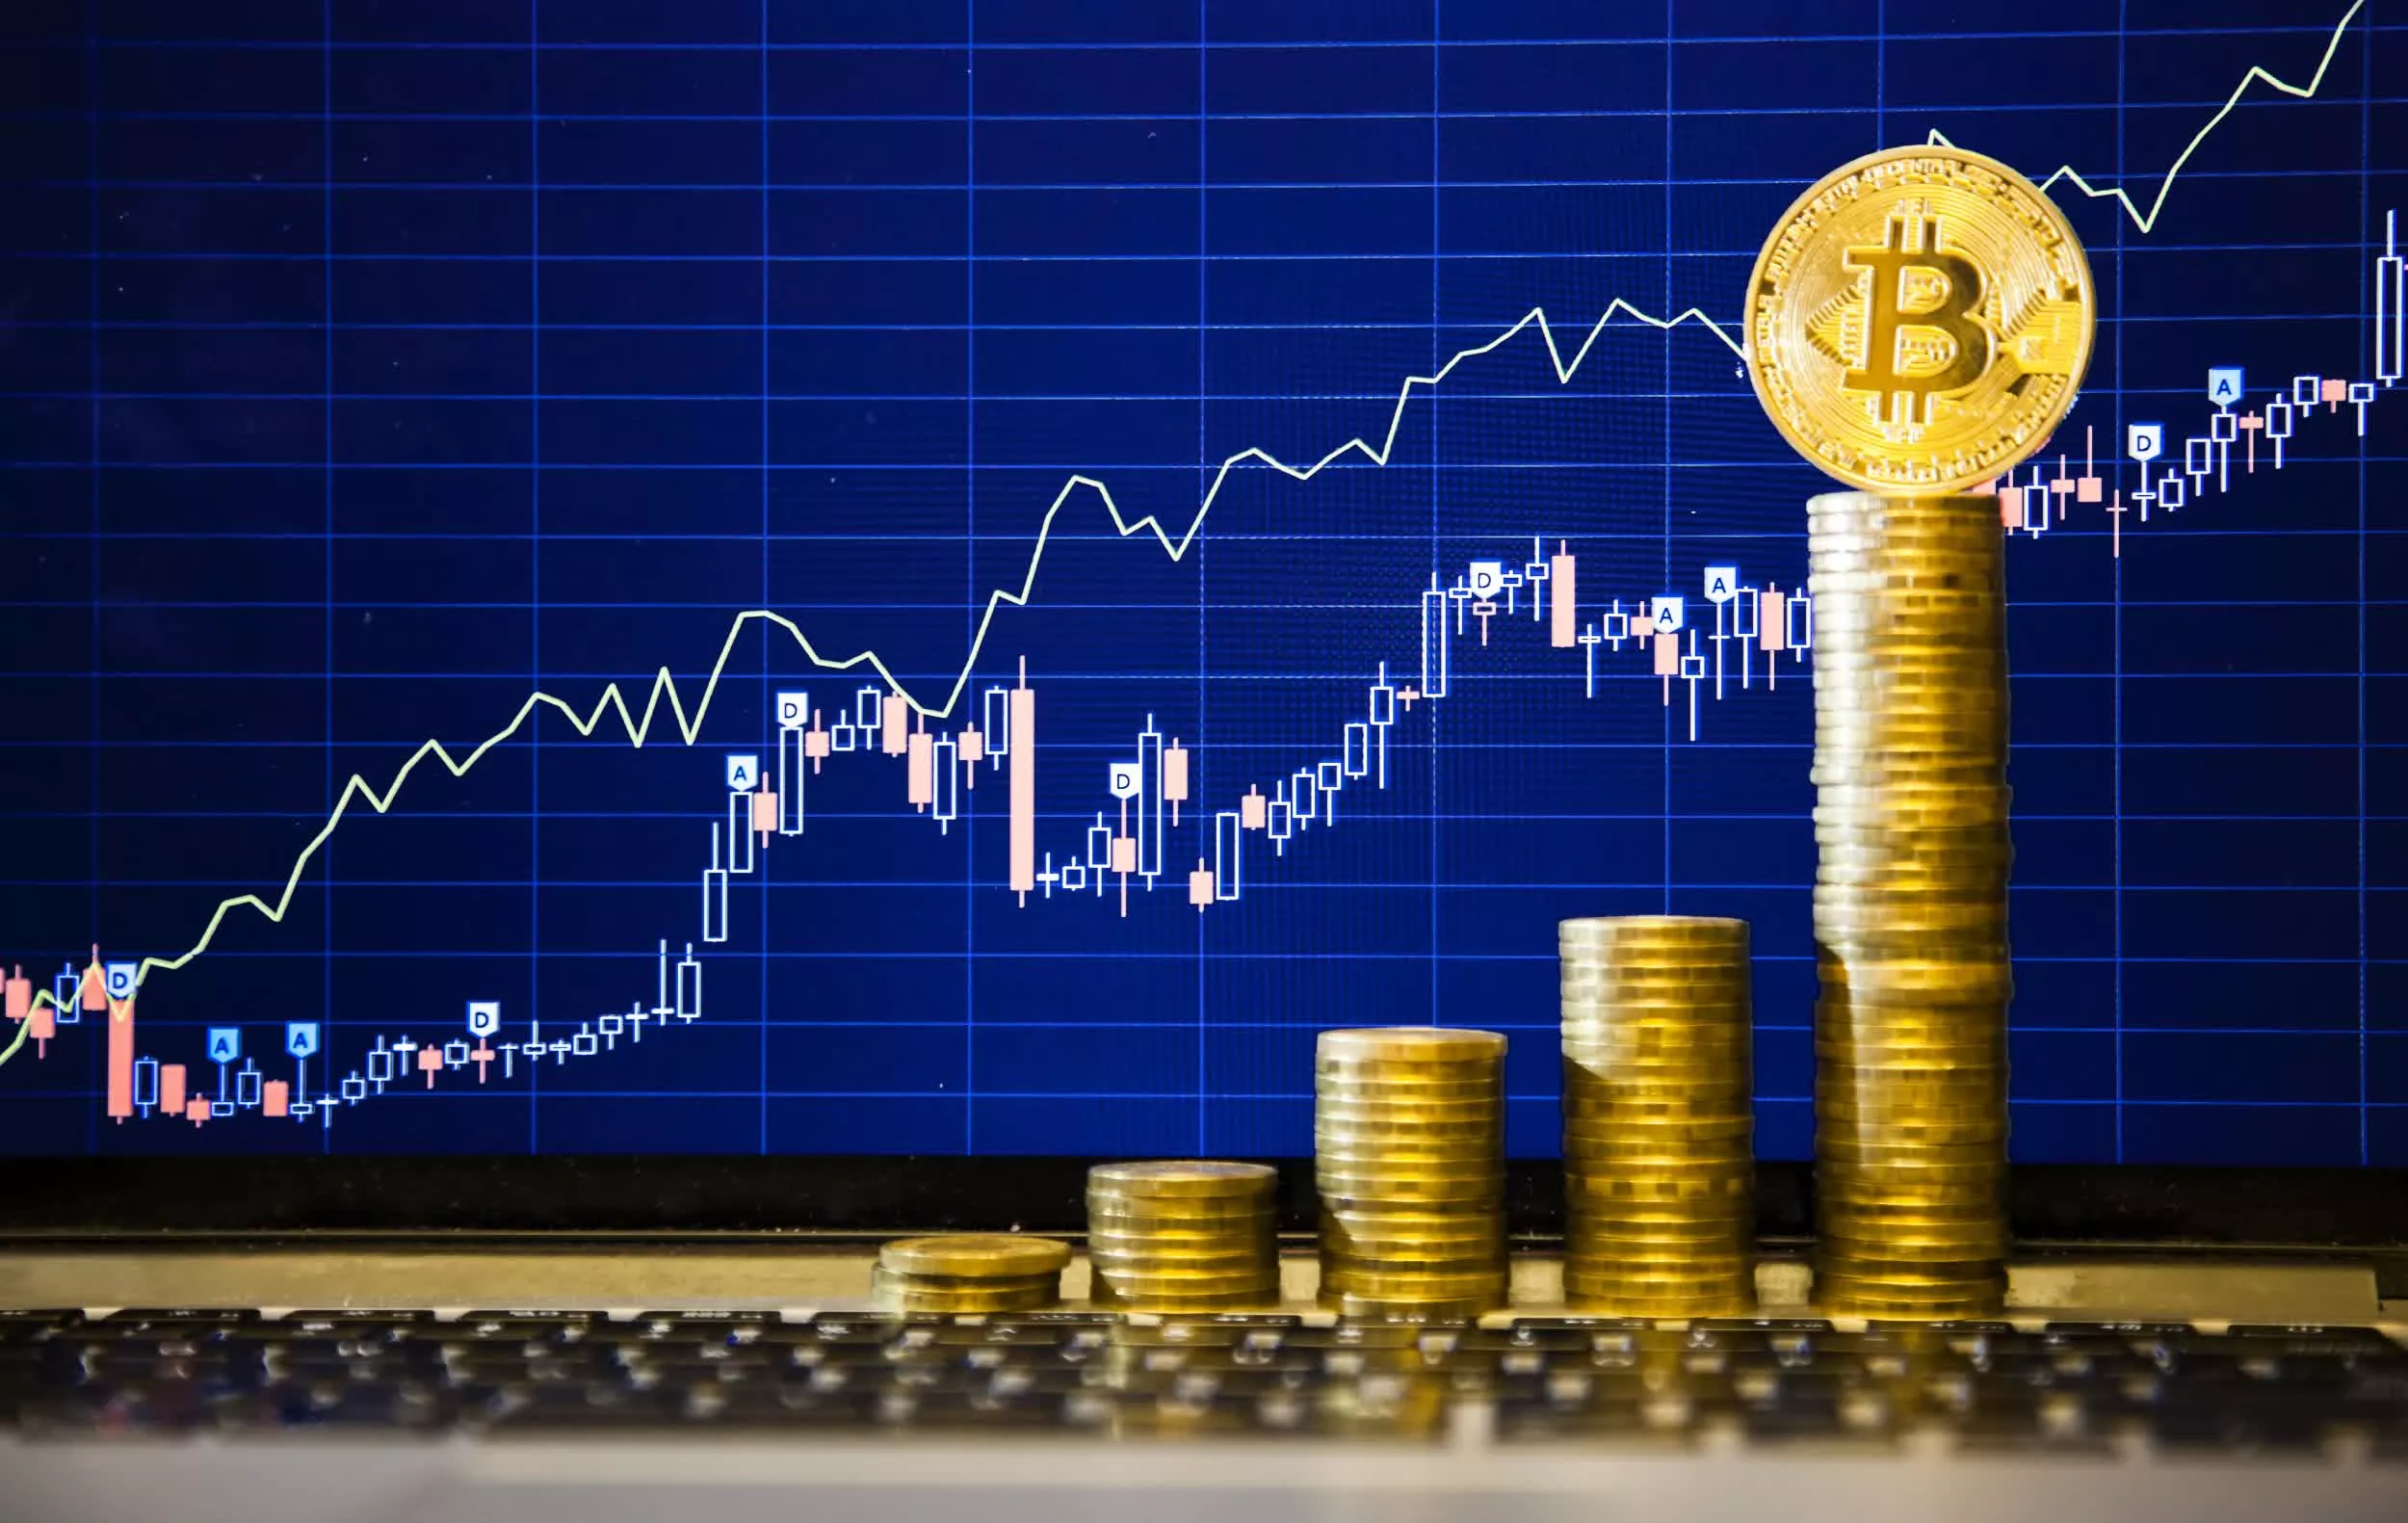 Despite Bitcoin’s recent price stability, fluctuating between $68,000 and $71,000, the cryptocurrency community remains bullish, with analysts forecasting an imminent breakout. Adrian Zidanic, a prominent analyst with the Crypt BB analyst group, has identified a bullish ascending triangle on Bitcoin’s chart, signaling potential upward movement. Breakout to $86,500 and Beyond On the “Thinking Crypto” podcast, Zidanic shared his optimistic outlook, predicting that Bitcoin could soon break out of its current consolidation phase and reach a target price of $86,500. While he acknowledges the unpredictability of the market, Zidanic sees a strong likelihood of a bullish trend, with potential peaks between $85,000 and $90,000. “I hope it goes higher. I hope it can touch $100,000,” Zidanic expressed, highlighting the positive sentiment among investors. Halving Event Sparks Bullish Momentum The forthcoming Bitcoin halving event, expected to occur in just a few weeks, is adding to the excitement. Historical data shows that halving events tend to catalyze bullish market momentum, and many in the crypto community are hopeful for a significant price surge. Crypto Market Continues to Thrive Beyond Bitcoin, the broader cryptocurrency market is showcasing its strength and growth. Tether, the leading stablecoin, reported an impressive $6.2 billion in net income for 2023, eclipsing earnings of traditional finance giants such as Goldman Sachs and Morgan Stanley. This achievement highlights the burgeoning impact of cryptocurrencies on the global financial stage. Political and Institutional Adoption Grows The integration of crypto into mainstream politics and finance is becoming increasingly apparent. In South Korea, for example, political parties are employing crypto-related incentives to woo voters, signifying the expanding influence of the crypto community. On the institutional front, major firms like BlackRock and Fidelity are delving into the crypto space with initiatives such as Ethereum ETFs and asset tokenization, further evidence of digital assets’ growing appeal and legitimacy. As Bitcoin teeters on the brink of a breakout, the overarching crypto market’s resilience and expansion underscore the sector’s vitality and potential. Investors and enthusiasts alike are watching closely, anticipating the next wave of growth and innovation in the dynamic world of cryptocurrency.